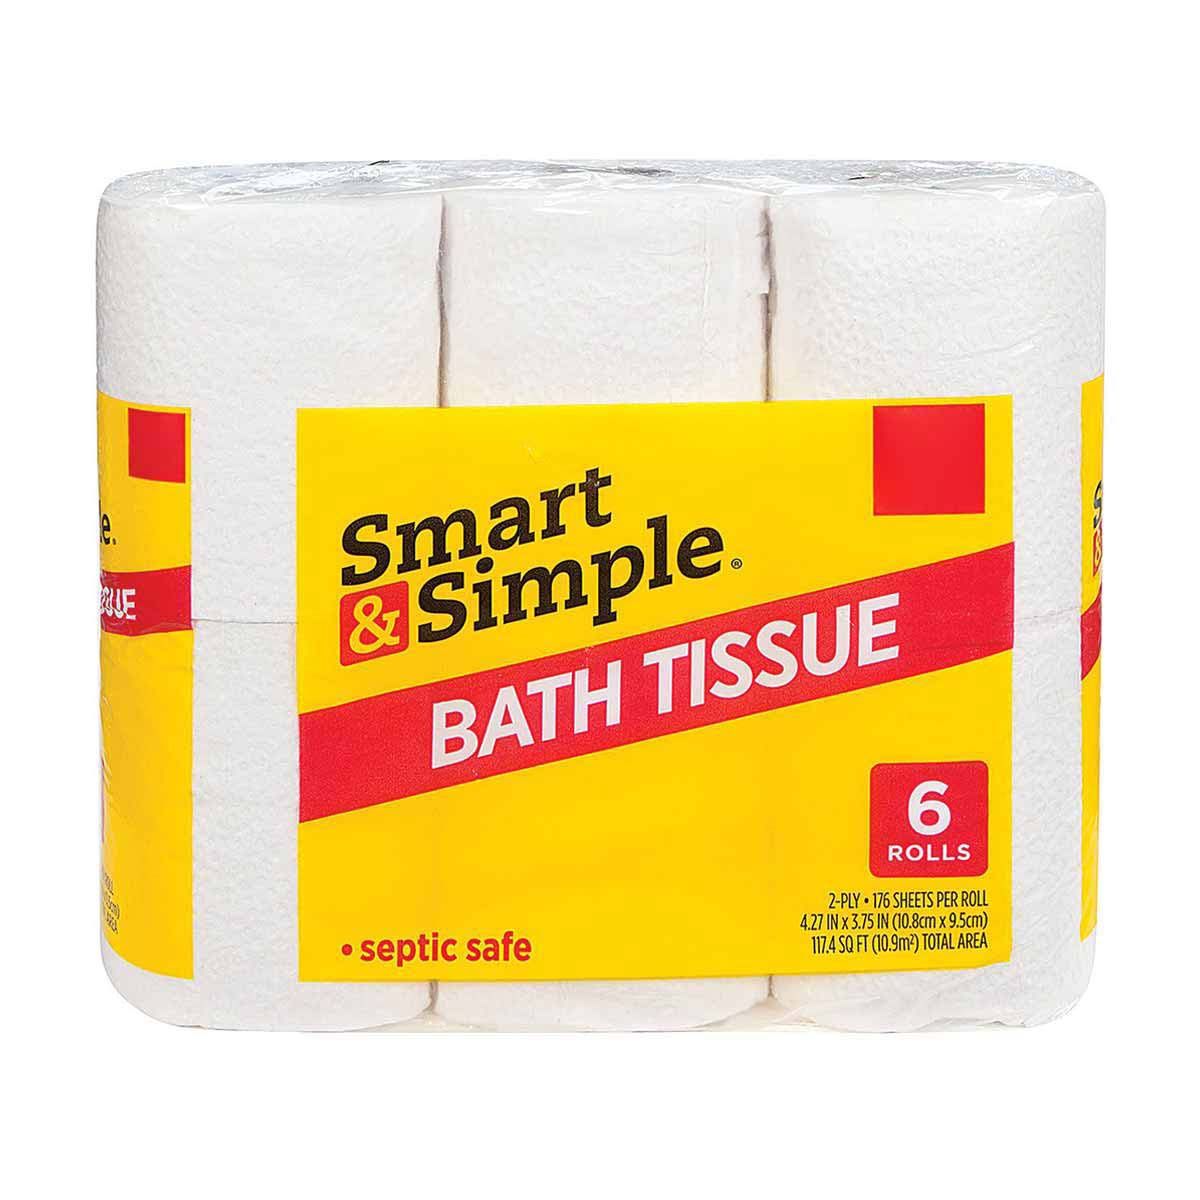 Smart & Simple, 176 sheet 2-ply Bath Tissue, 6 rolls per pack on Sale At Dollar General